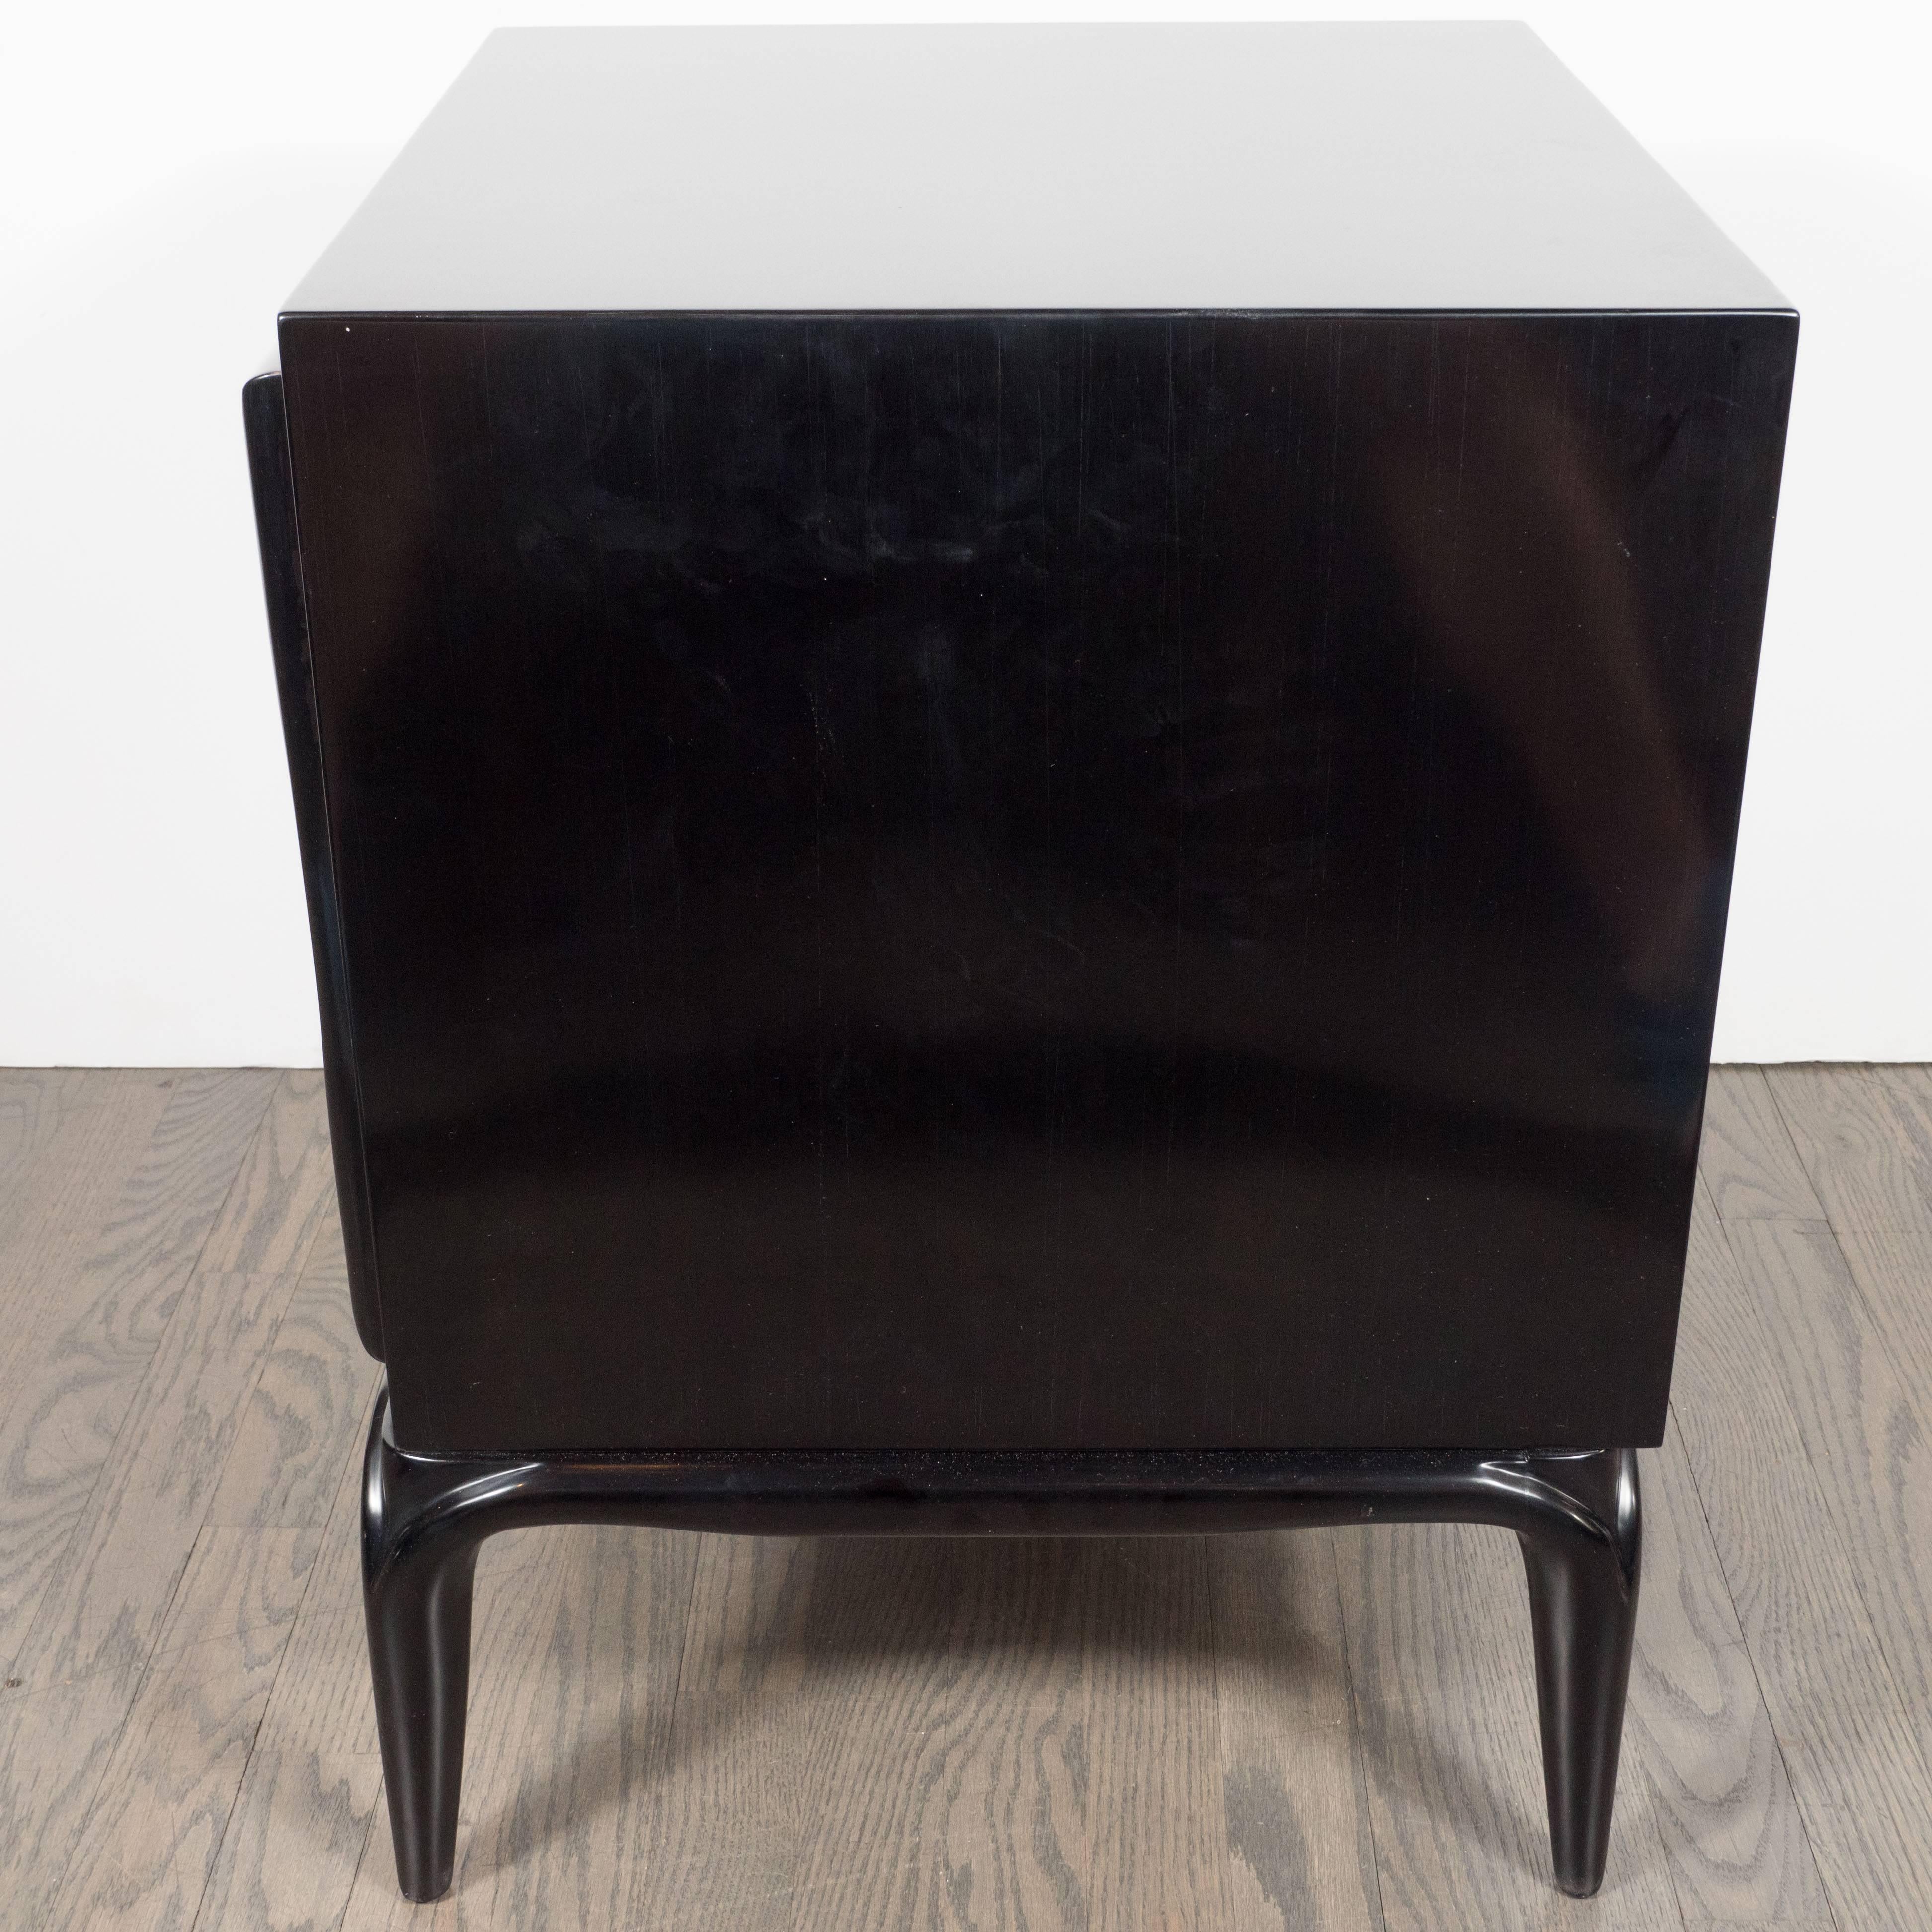 Ebonized Sculptural Pair of Walnut Nightstands or End Tables with Geometric Details